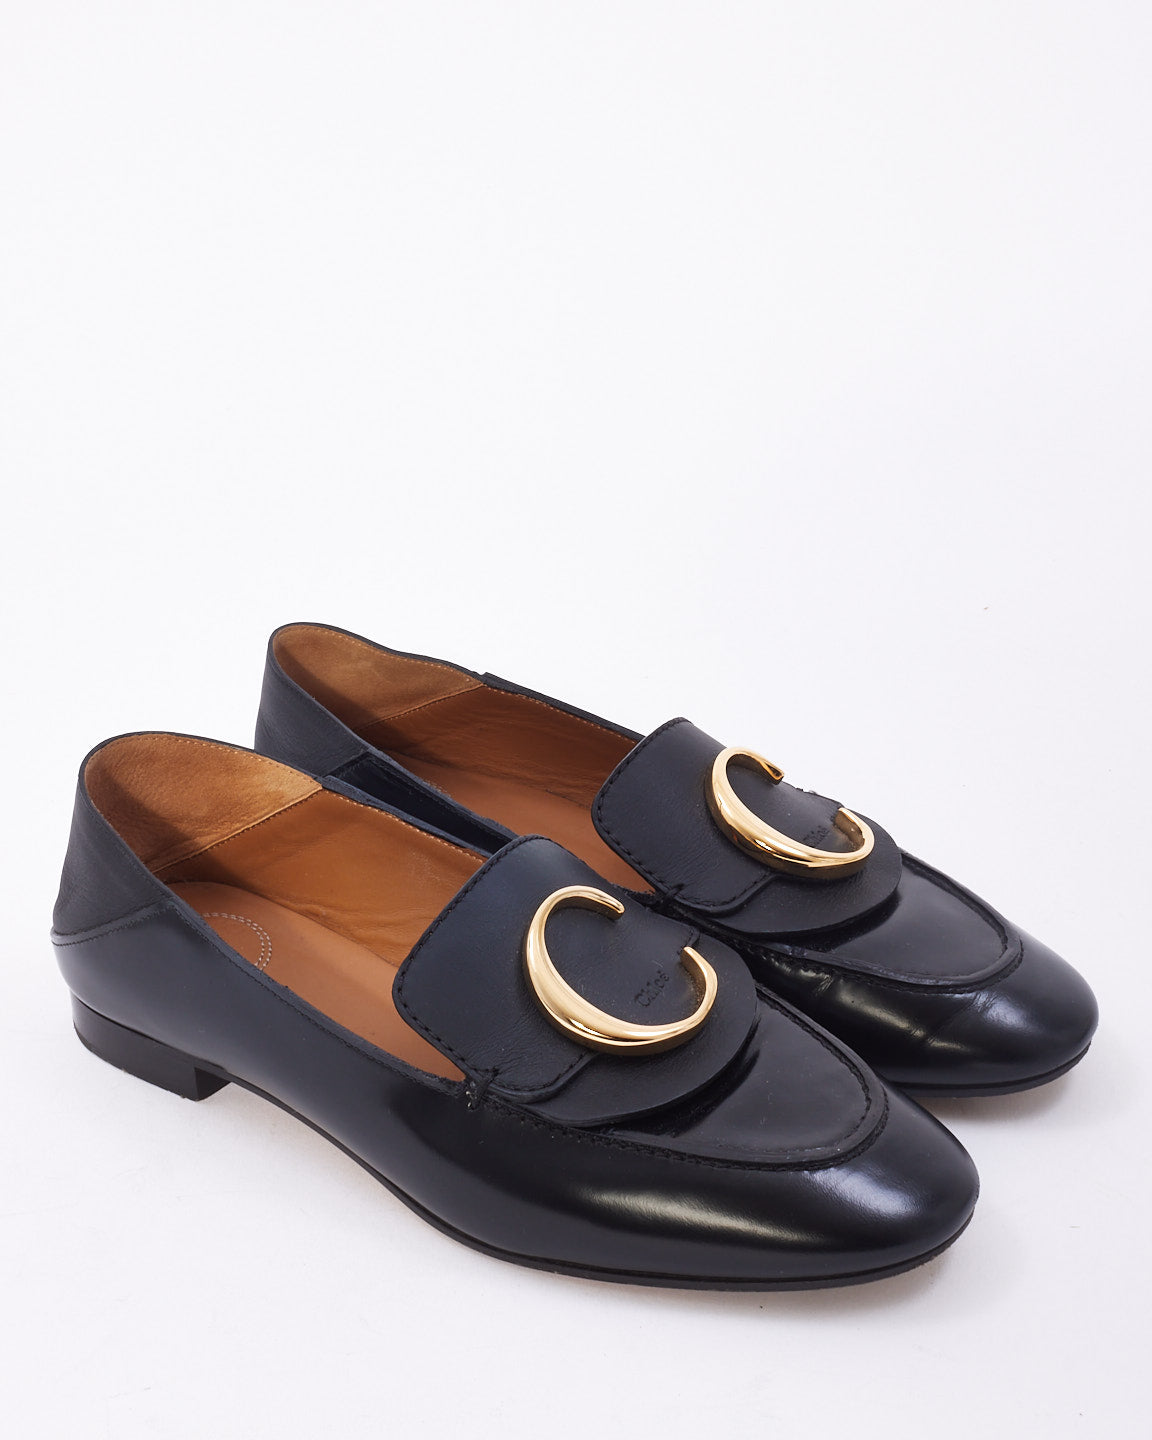 Chloé Black Leather C Loafers - 36.5